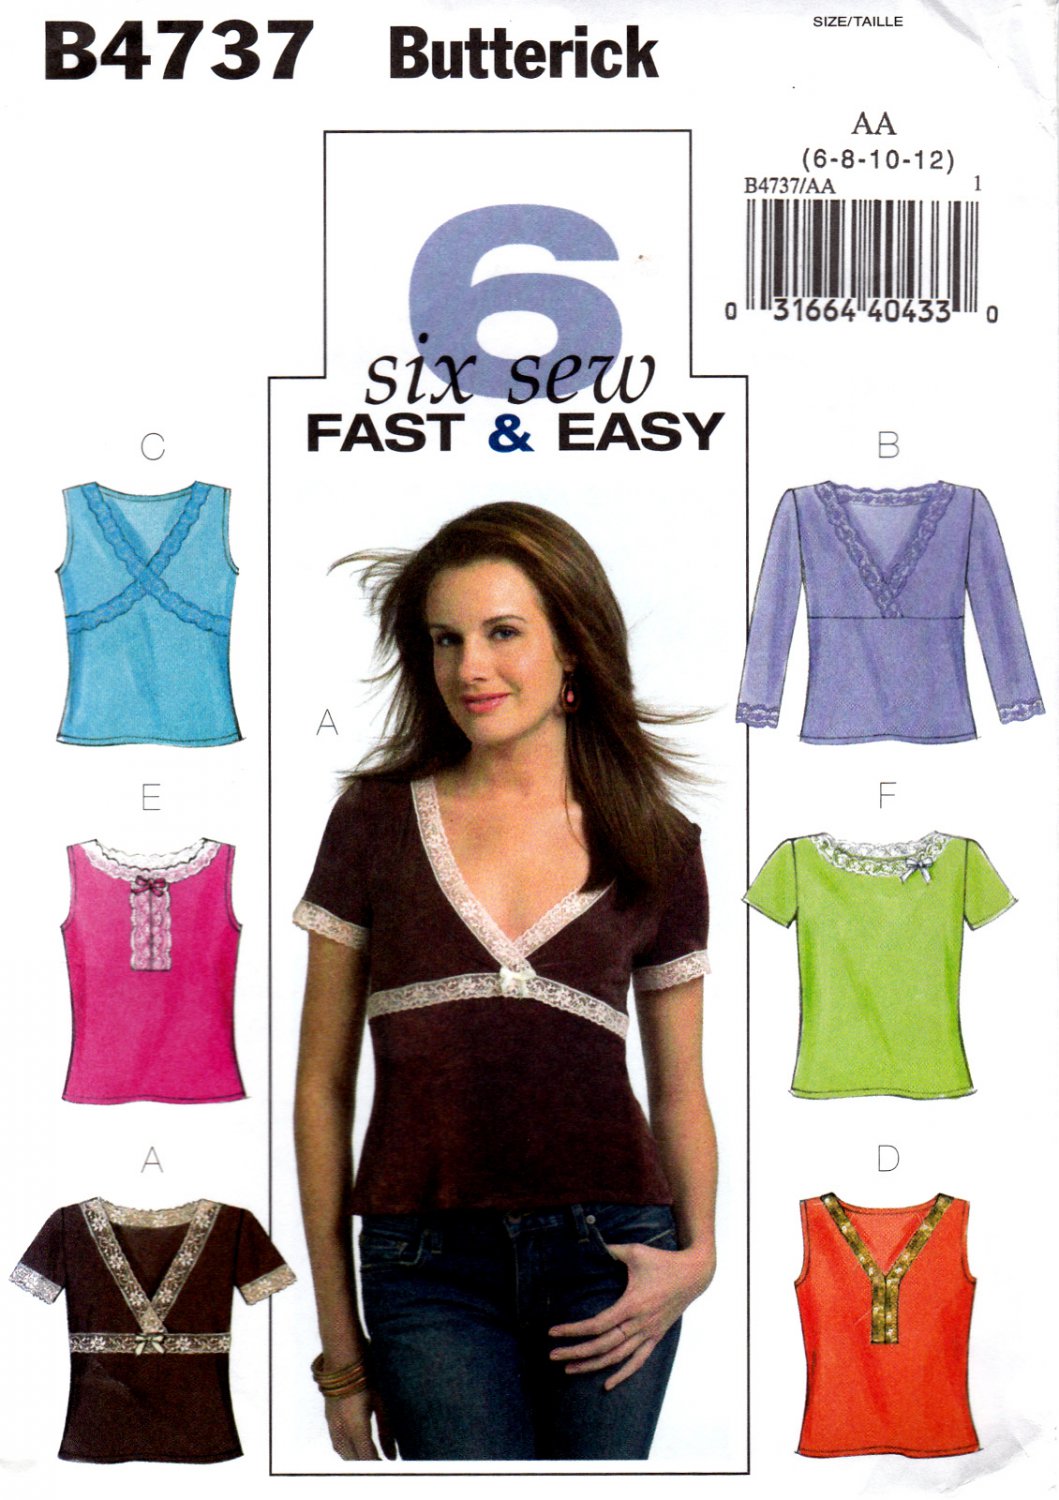 Butterick B4737 4737 Misses Tops Pullover Sewing Pattern Sizes 6-8-10-12 Six Looks In One Easy Sew